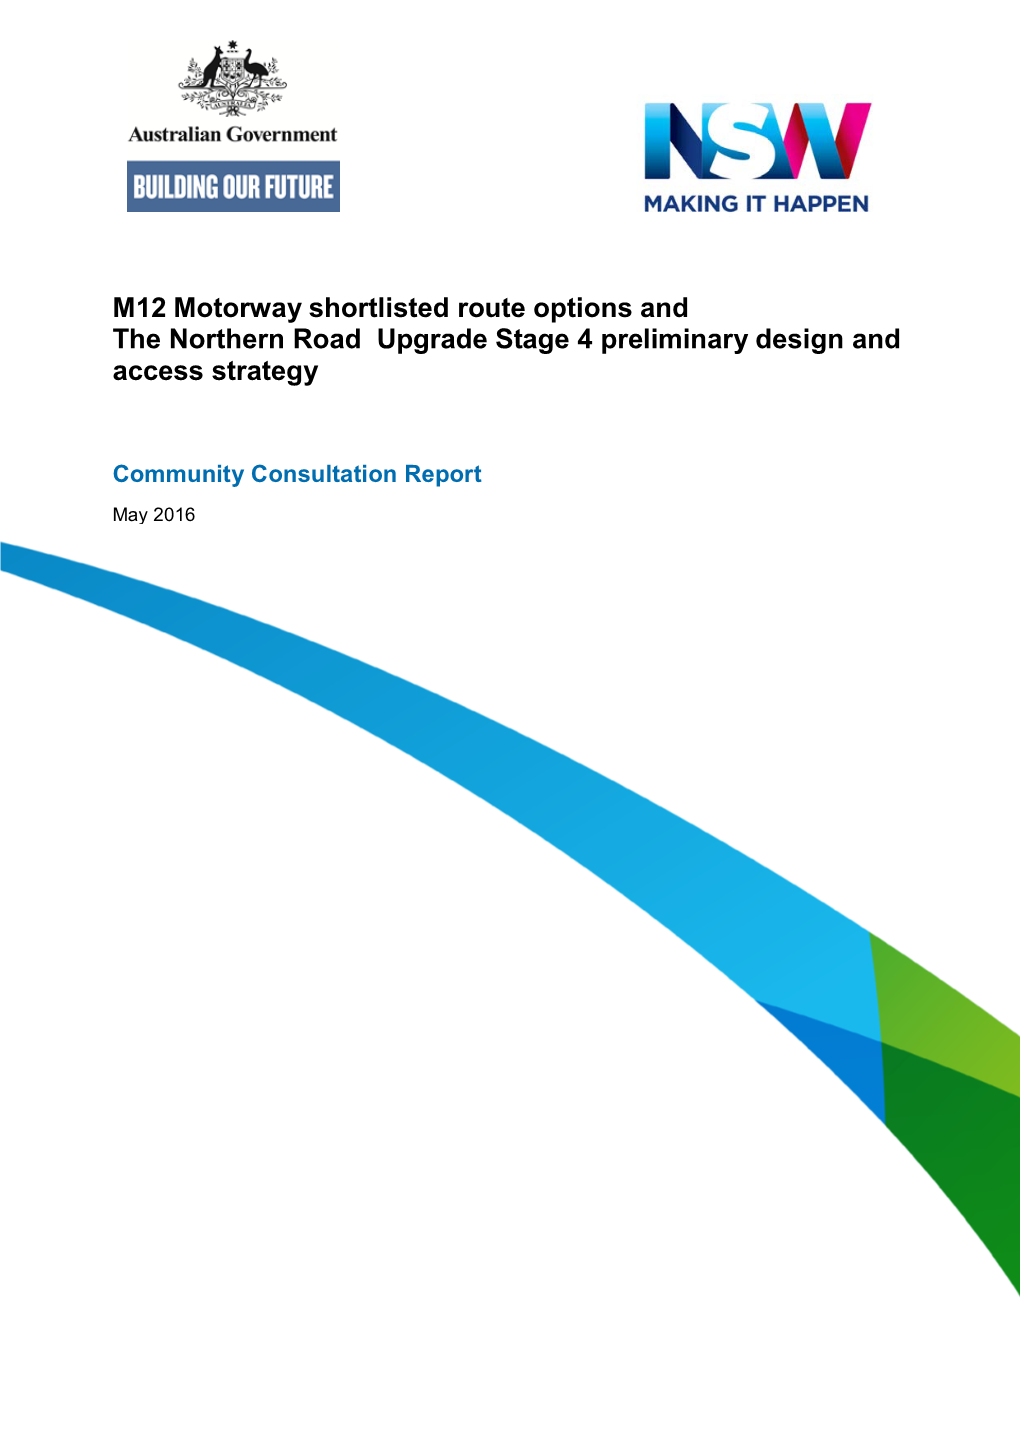 M12 Motorway Shortlisted Route Options and the Northern Road Upgrade Stage 4 Preliminary Design and Access Strategy